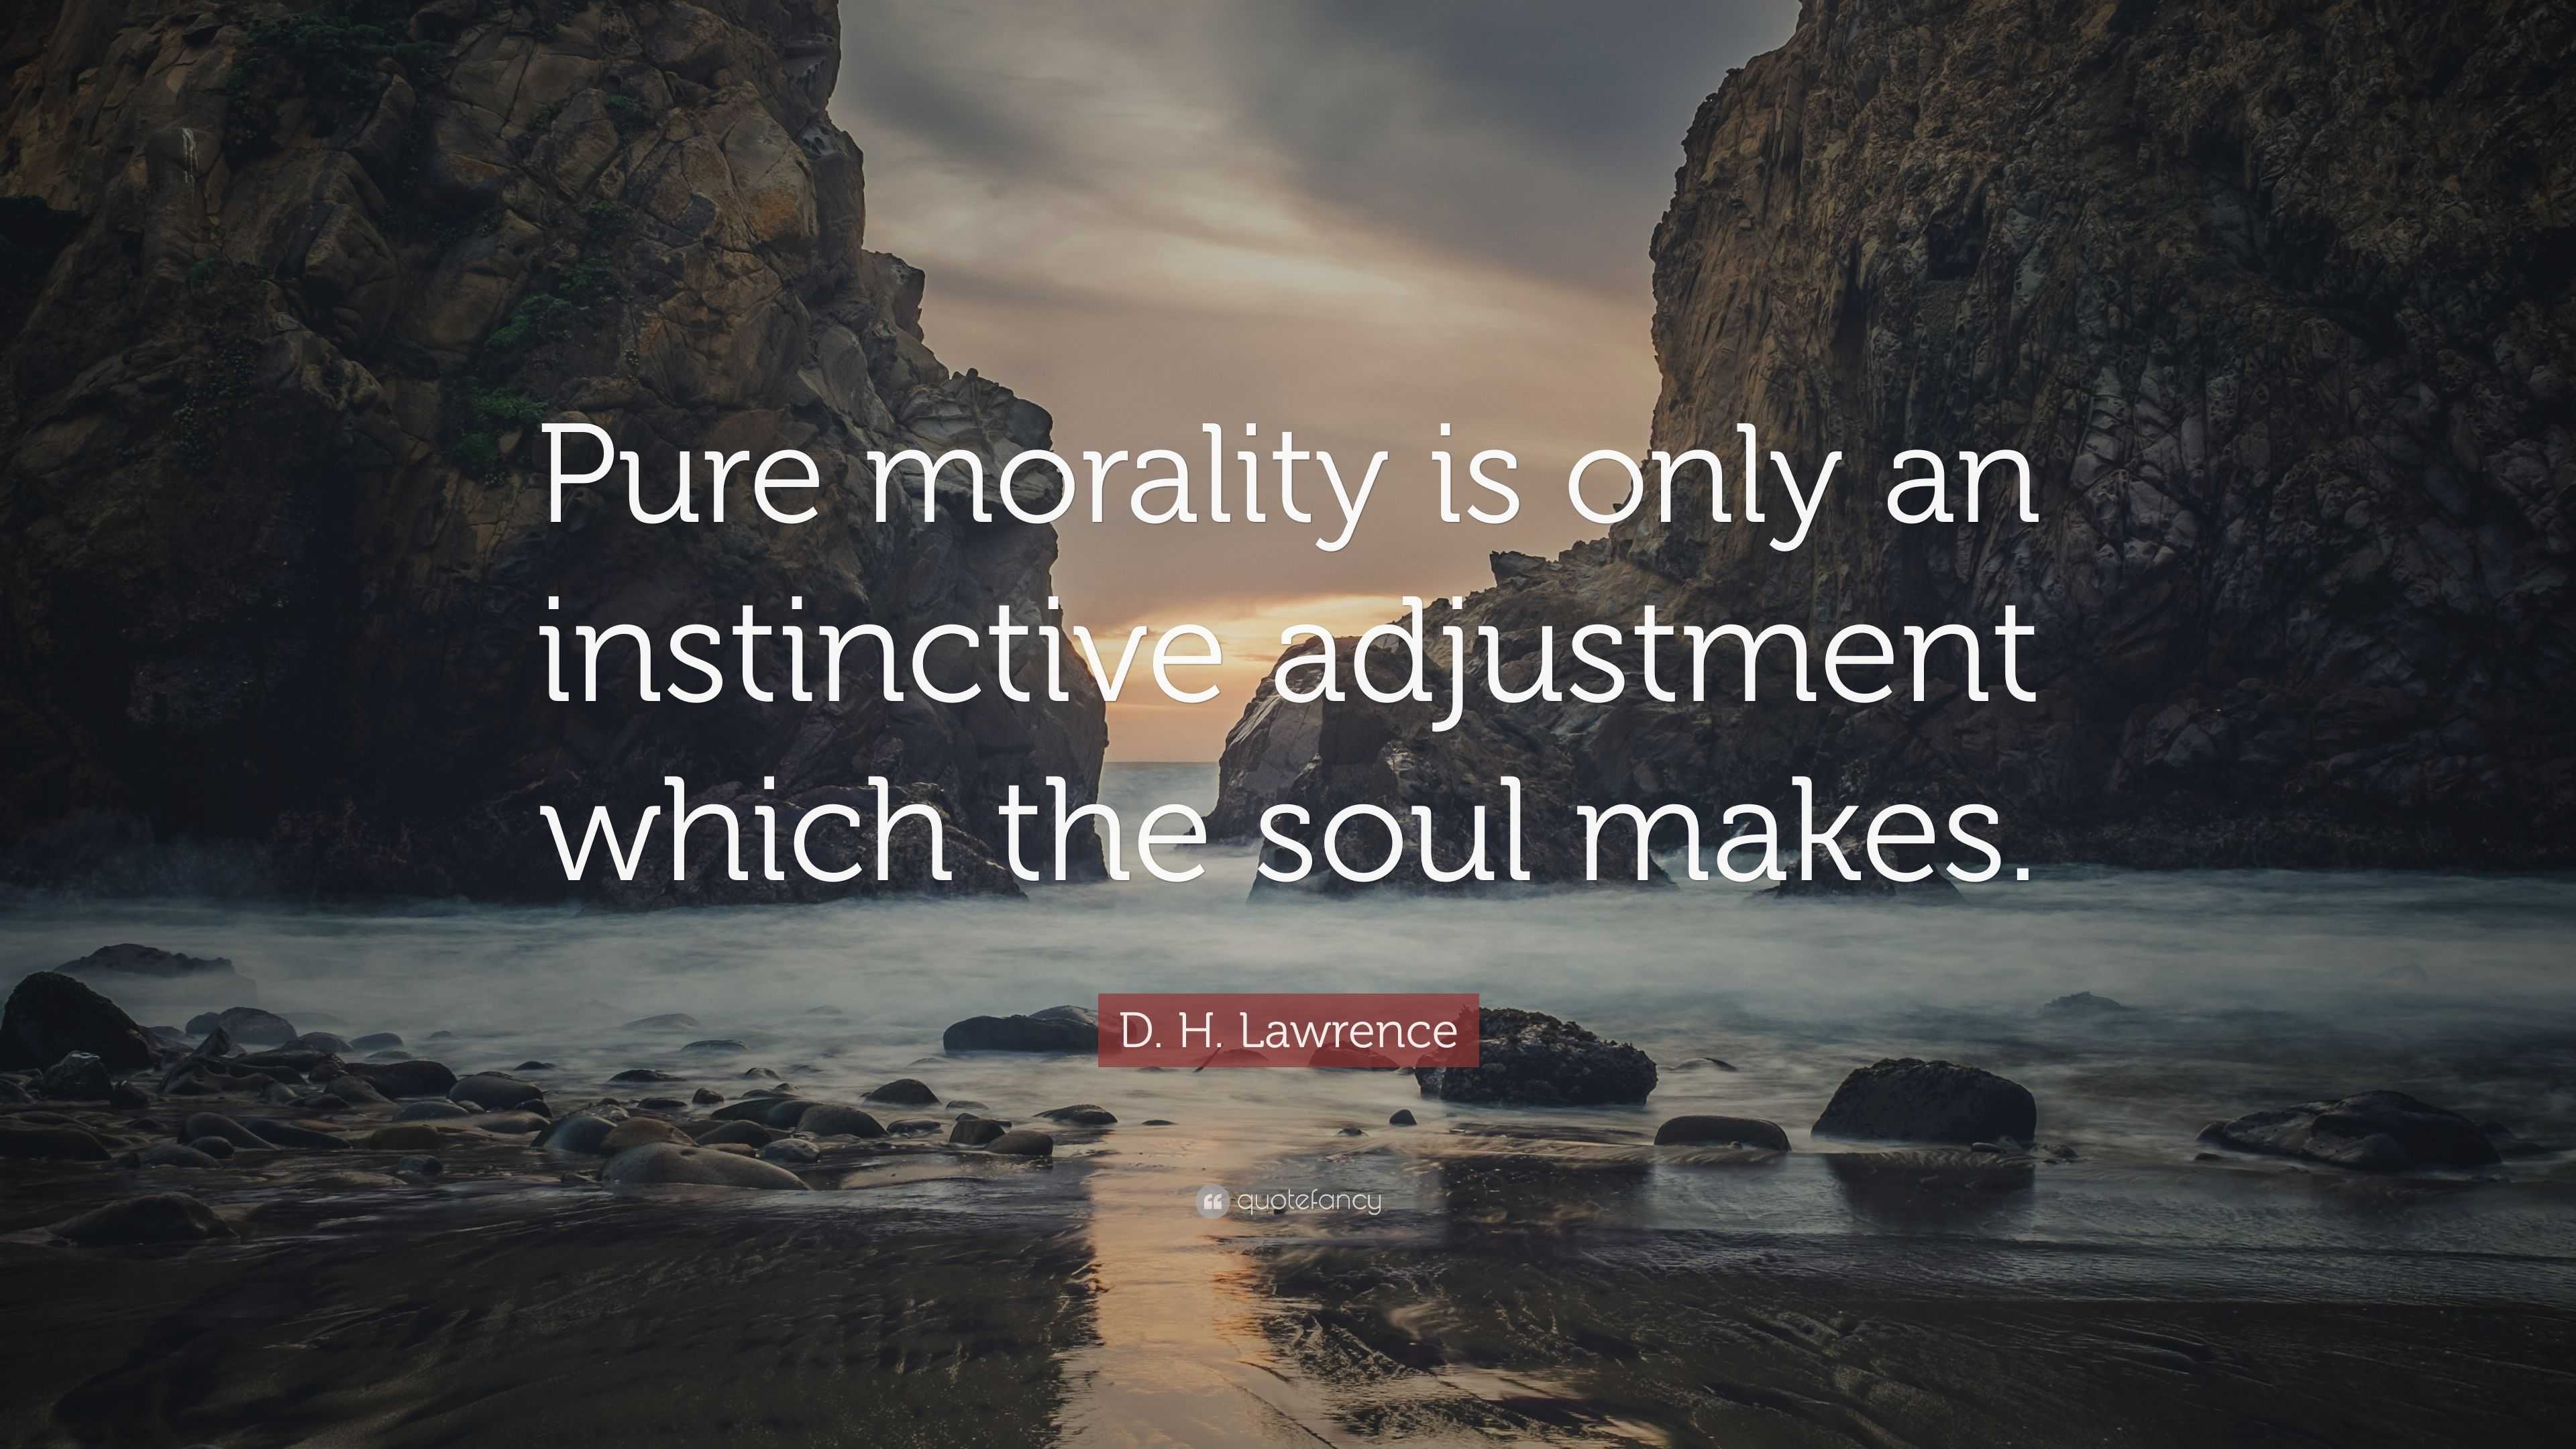 D H Lawrence Quote “pure Morality Is Only An Instinctive Adjustment Which The Soul Makes” 4694